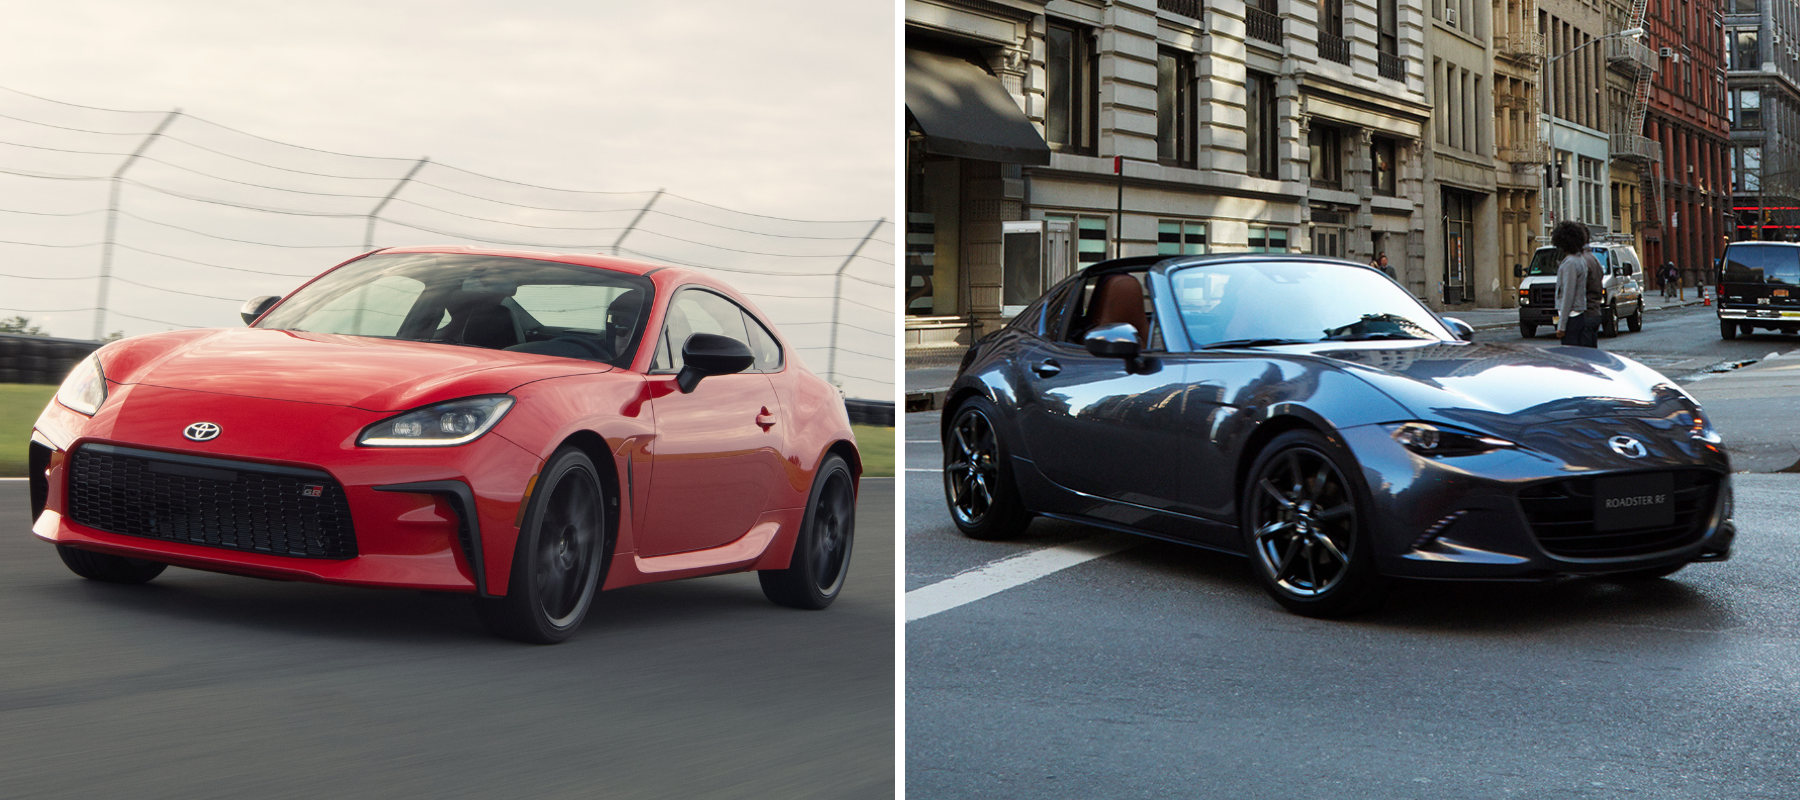 The Toyota GR86 sports car in red and the Mazda MX-5 Miata roadster in gray